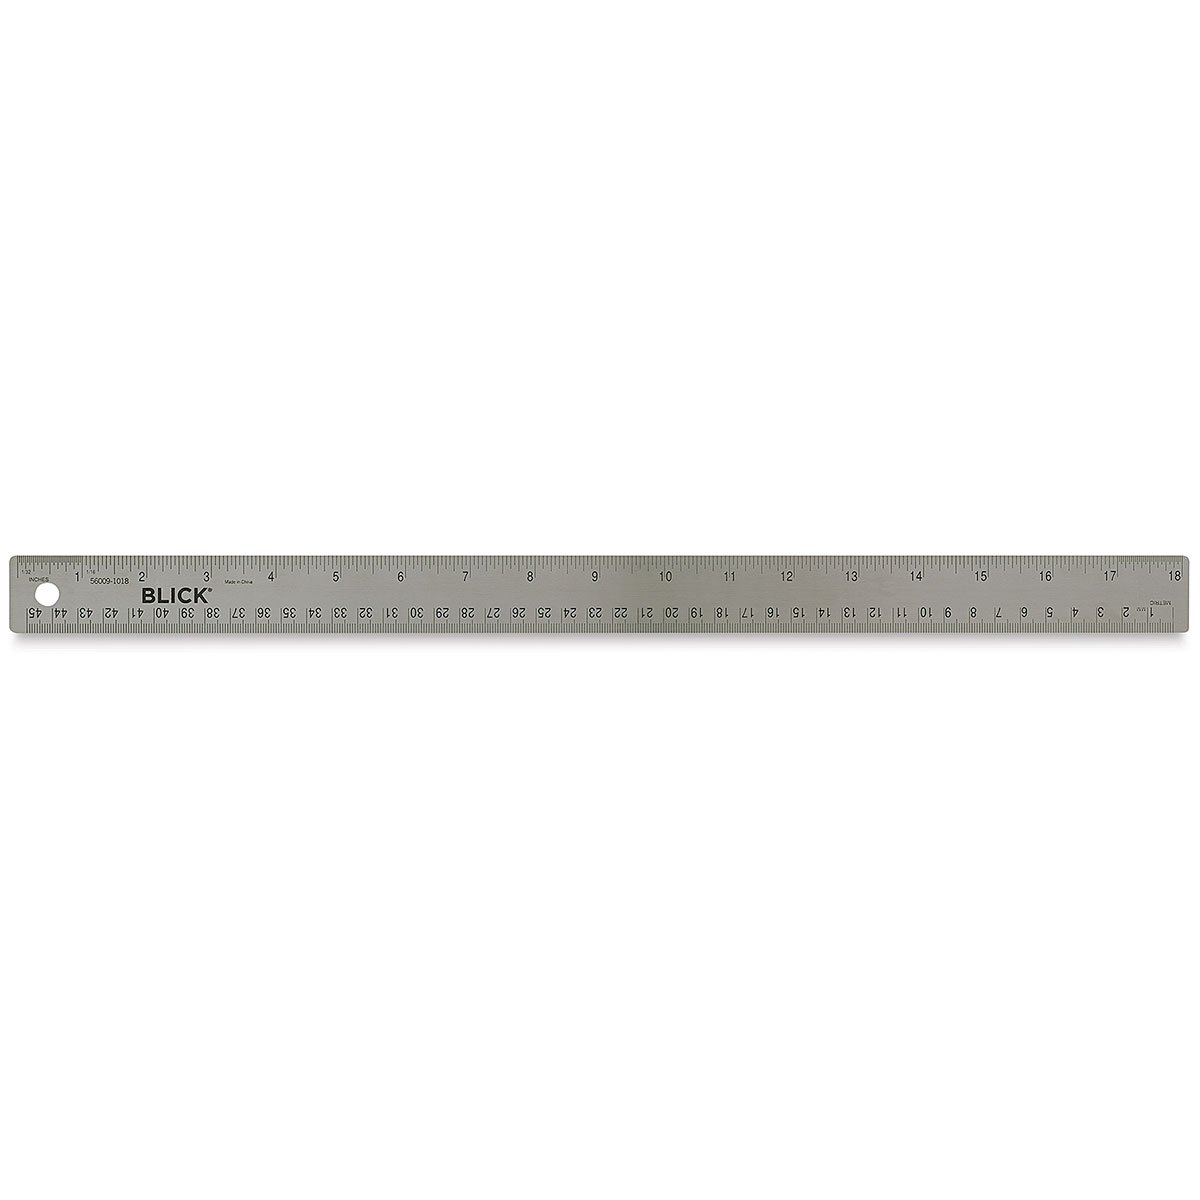 Promotional Stainless Steel 18 Architectural Ruler